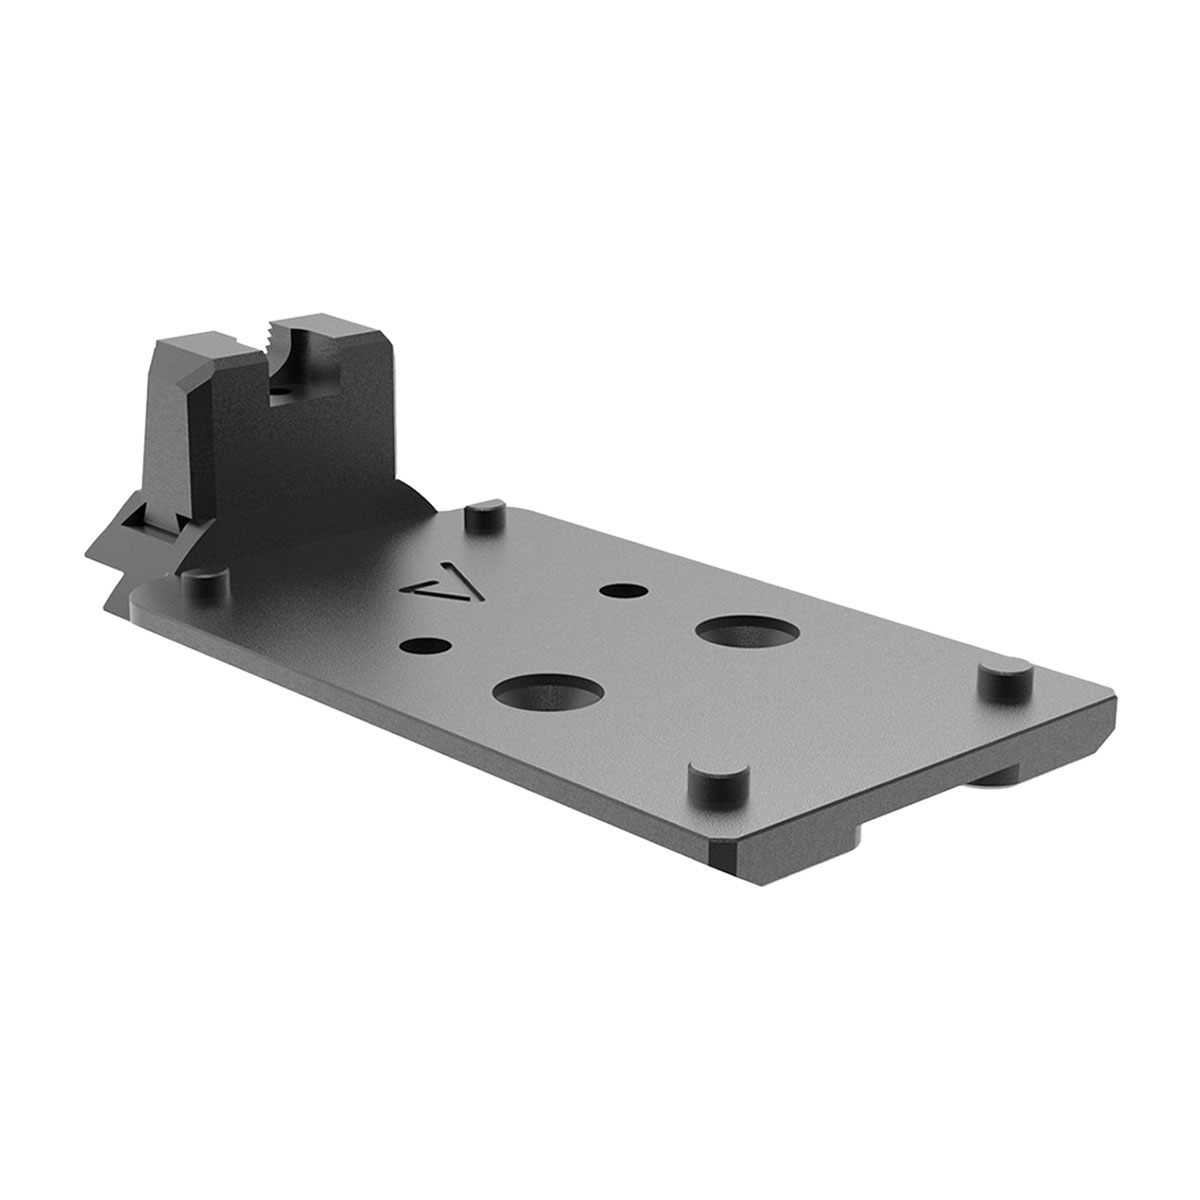 SPRINGFIELD ARMORY - AGENCY OPTIC SYSTEM (AOS) MOUNTING PLATES FOR 1911 DS PRODIGY